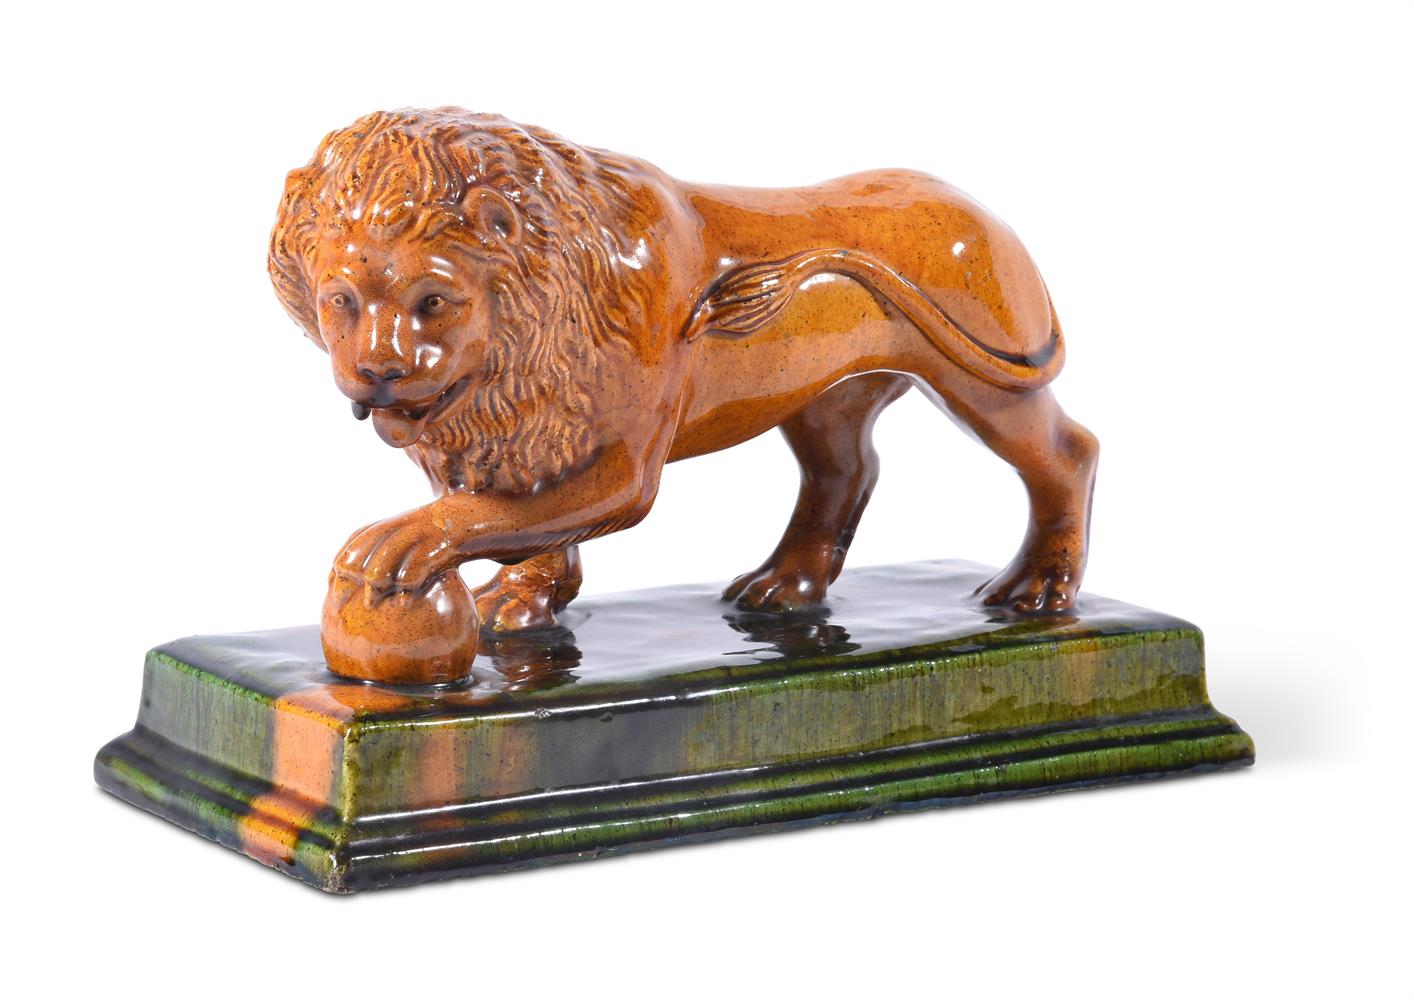 A CONTINENTAL GLAZED STONEWARE MODEL OF A MEDICI LION, LATE 19TH CENTURY